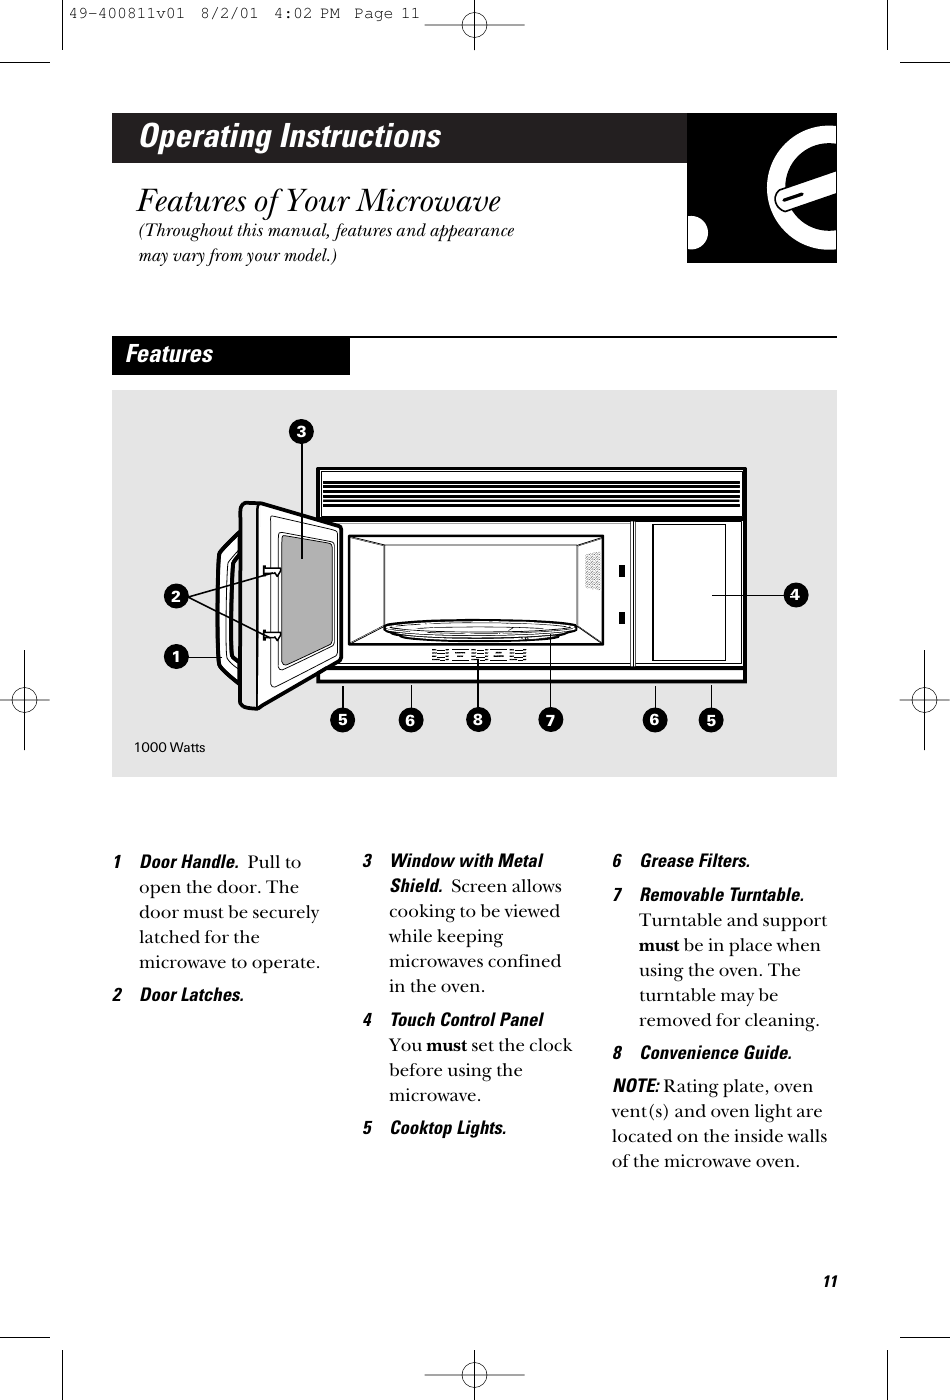 Operating InstructionsFeatures of Your Microwave(Throughout this manual, features and appearancemay vary from your model.)1 Door Handle.  Pull toopen the door. Thedoor must be securelylatched for themicrowave to operate.2 Door Latches.3 Window with MetalShield.  Screen allowscooking to be viewedwhile keepingmicrowaves confined in the oven.4 Touch Control Panel You must set the clockbefore using themicrowave. 5 Cooktop Lights.6 Grease Filters.7 Removable Turntable.Turntable and supportmust be in place whenusing the oven. Theturntable may beremoved for cleaning.8 Convenience Guide.NOTE: Rating plate, ovenvent(s) and oven light arelocated on the inside wallsof the microwave oven.Features35568711641000 Watts1249-400811v01  8/2/01  4:02 PM  Page 11